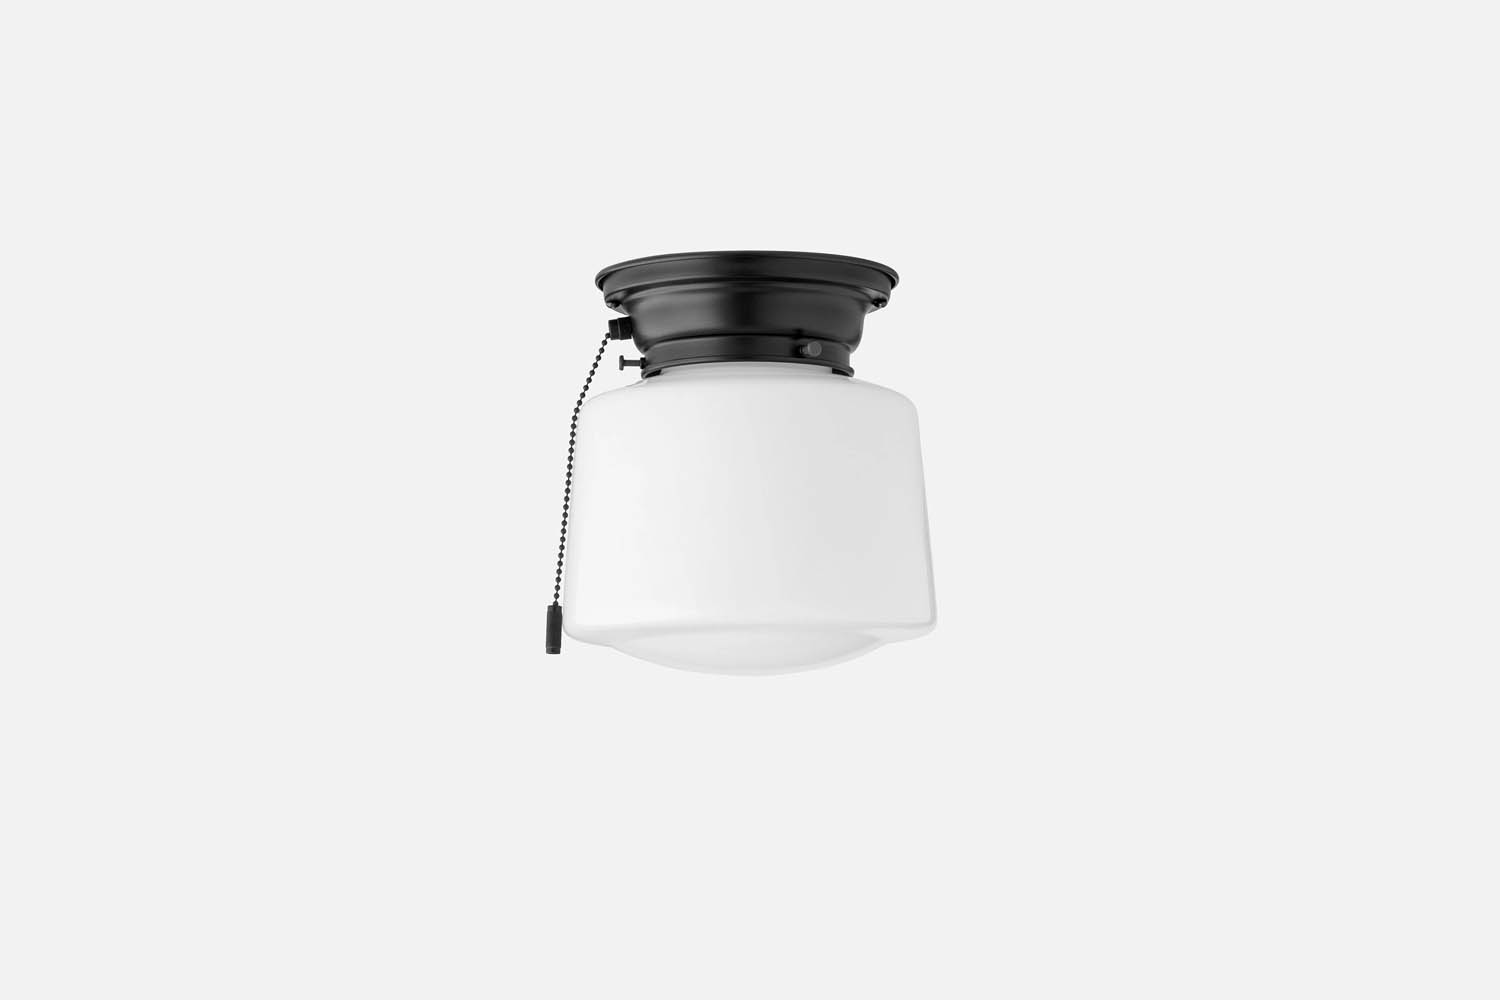 the schoolhouse otis 4 inch outdoor ceiling light comes in four finishes; $19 9